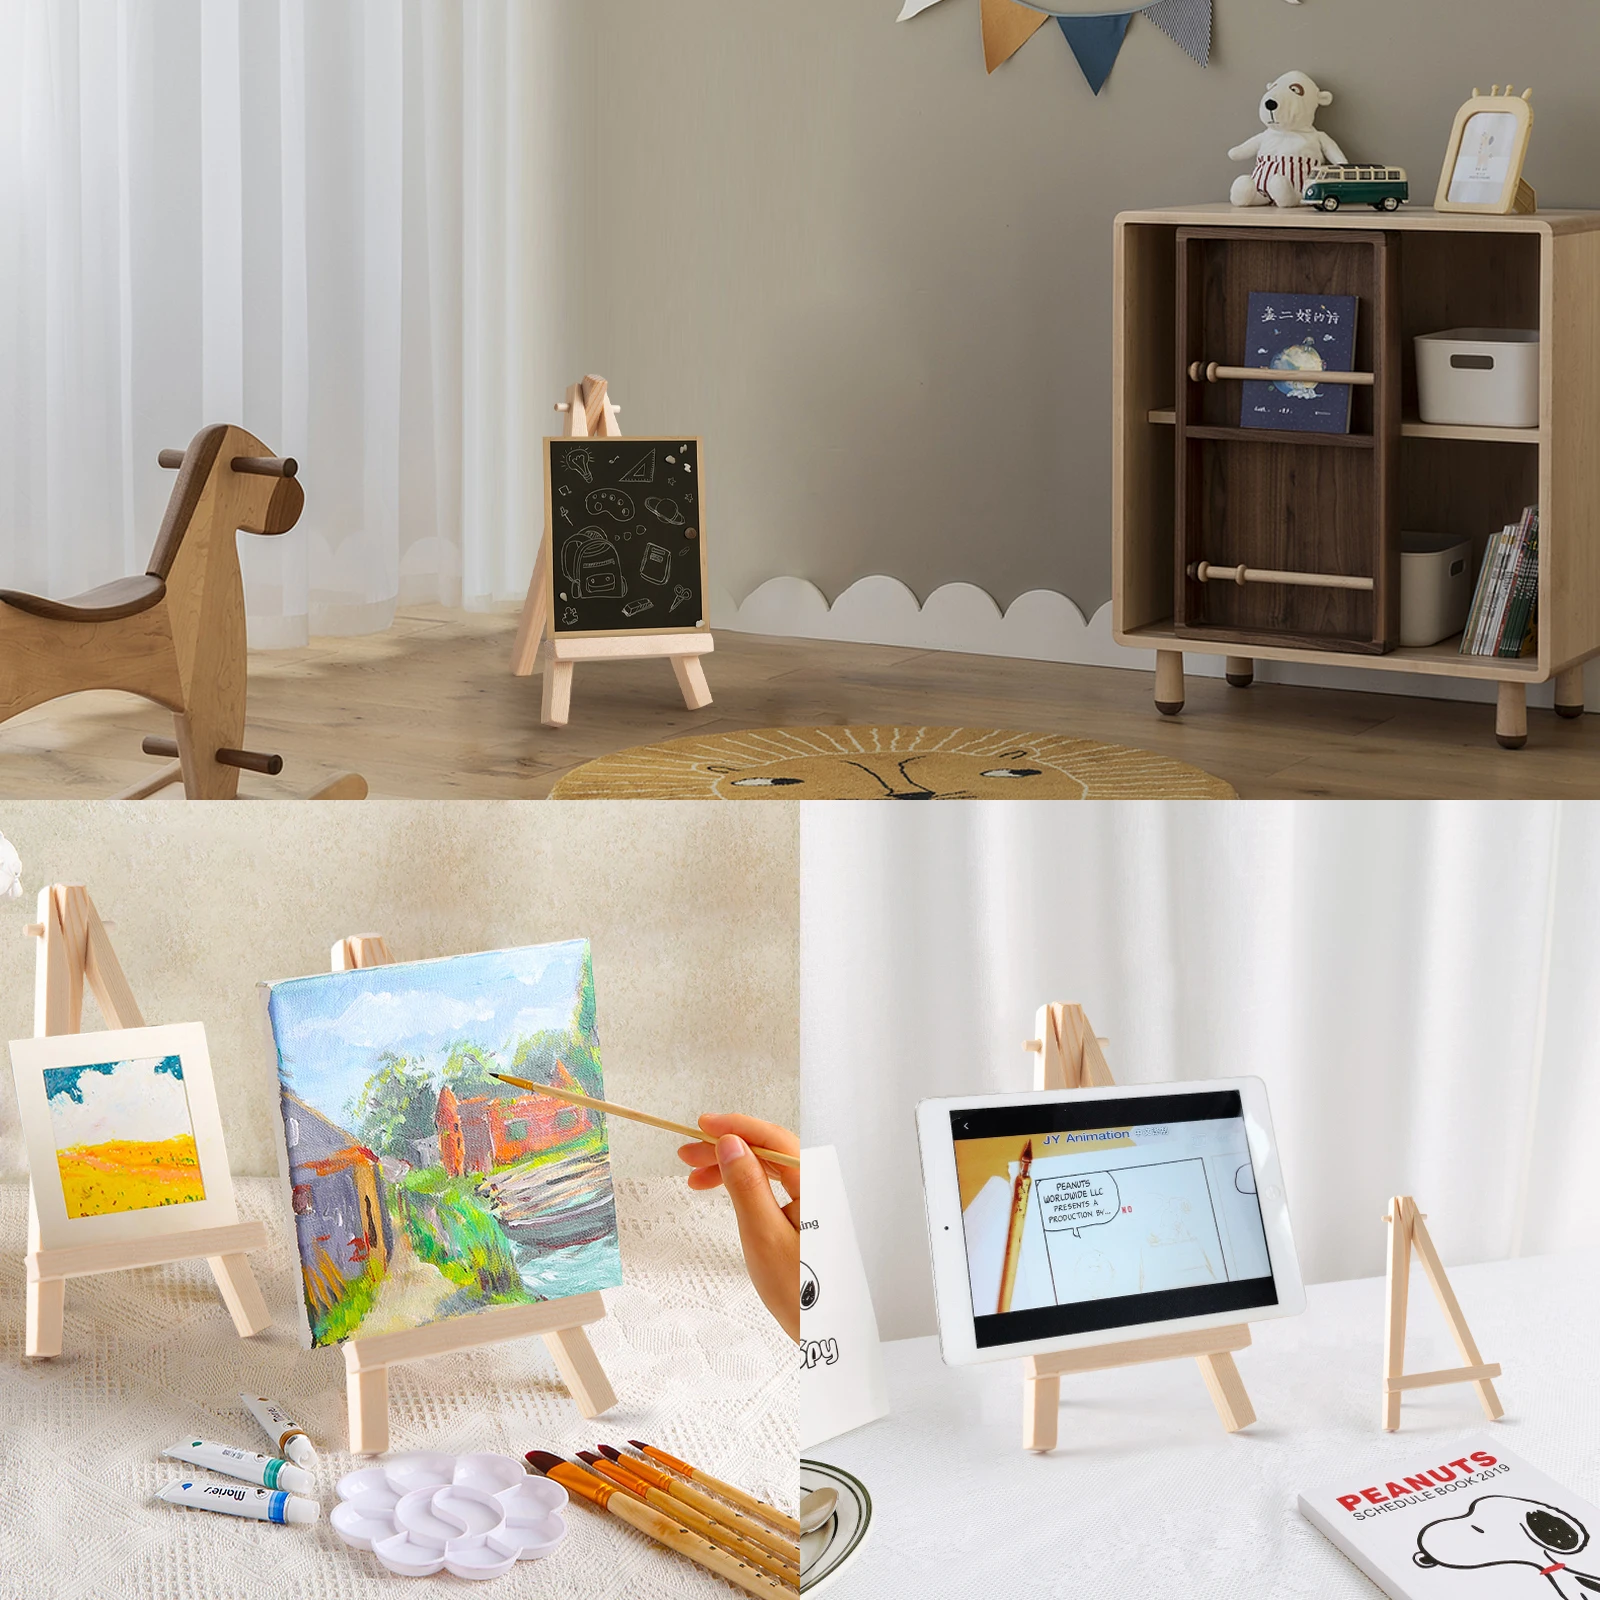 

DIY Supply 3.55 x 6.3 inch Mini Wood Painting Easel For Painting Postcard Photo Display Holder Frame Cute Desk Decor